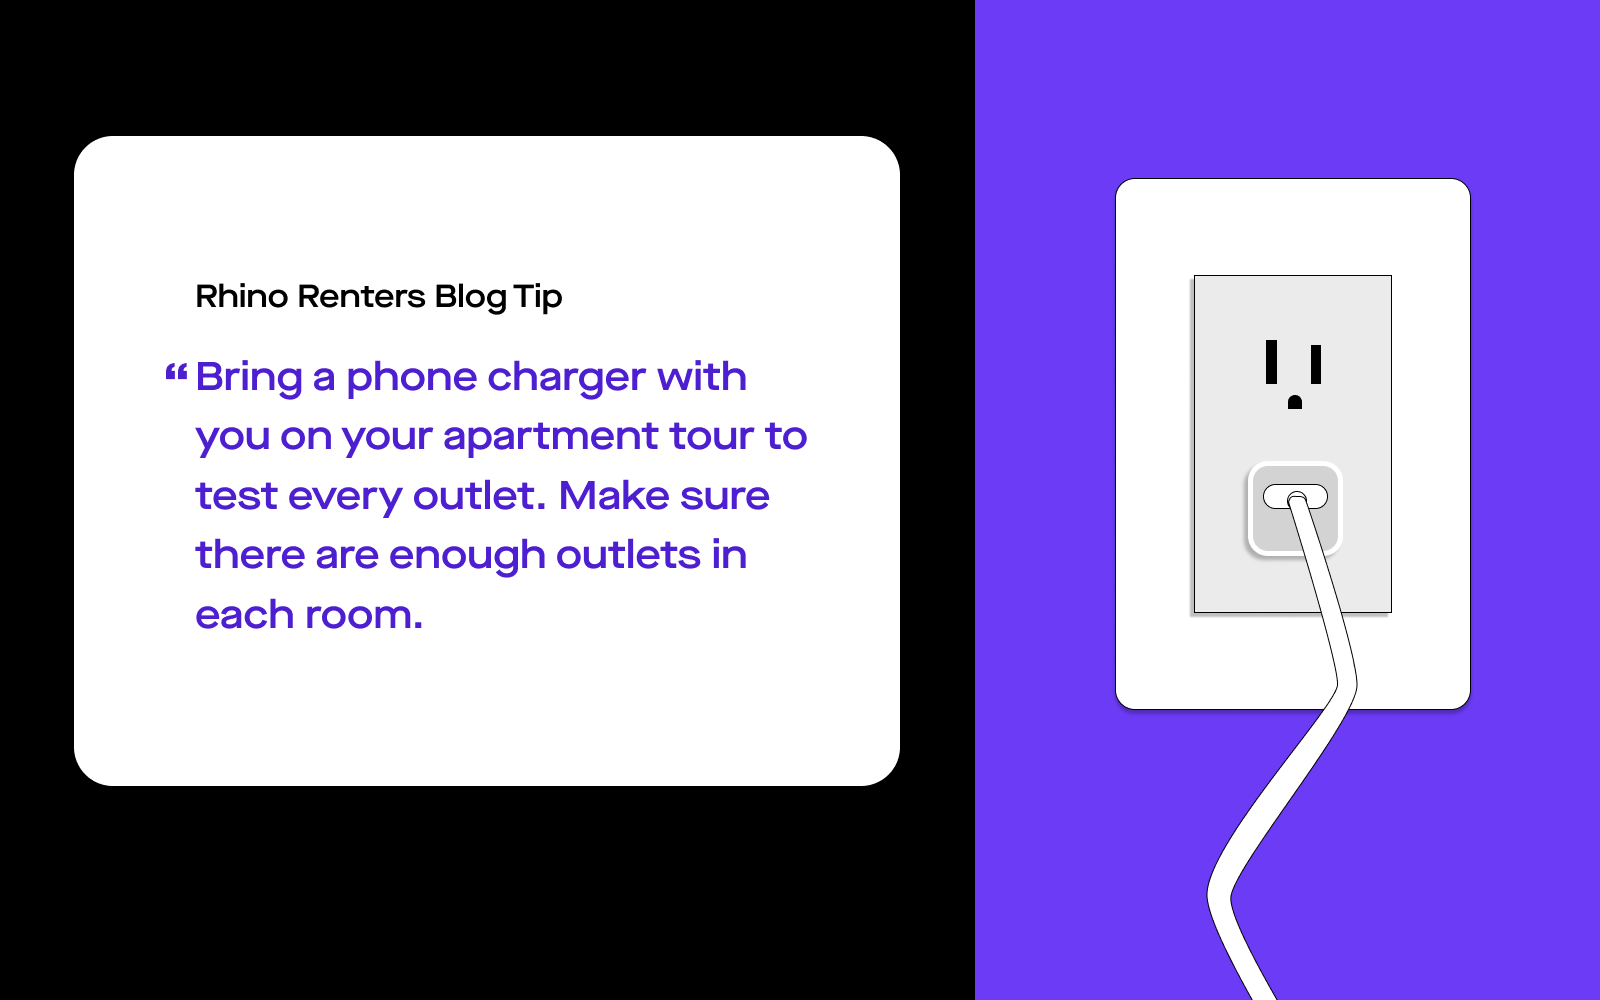 Graphic Quote for Apartment Tour Checklists, "Rhino Renters Blog Tip: Bring a phone charger with you on your apartment tour to test every outlet. Make sure there are enough outlets in each room."